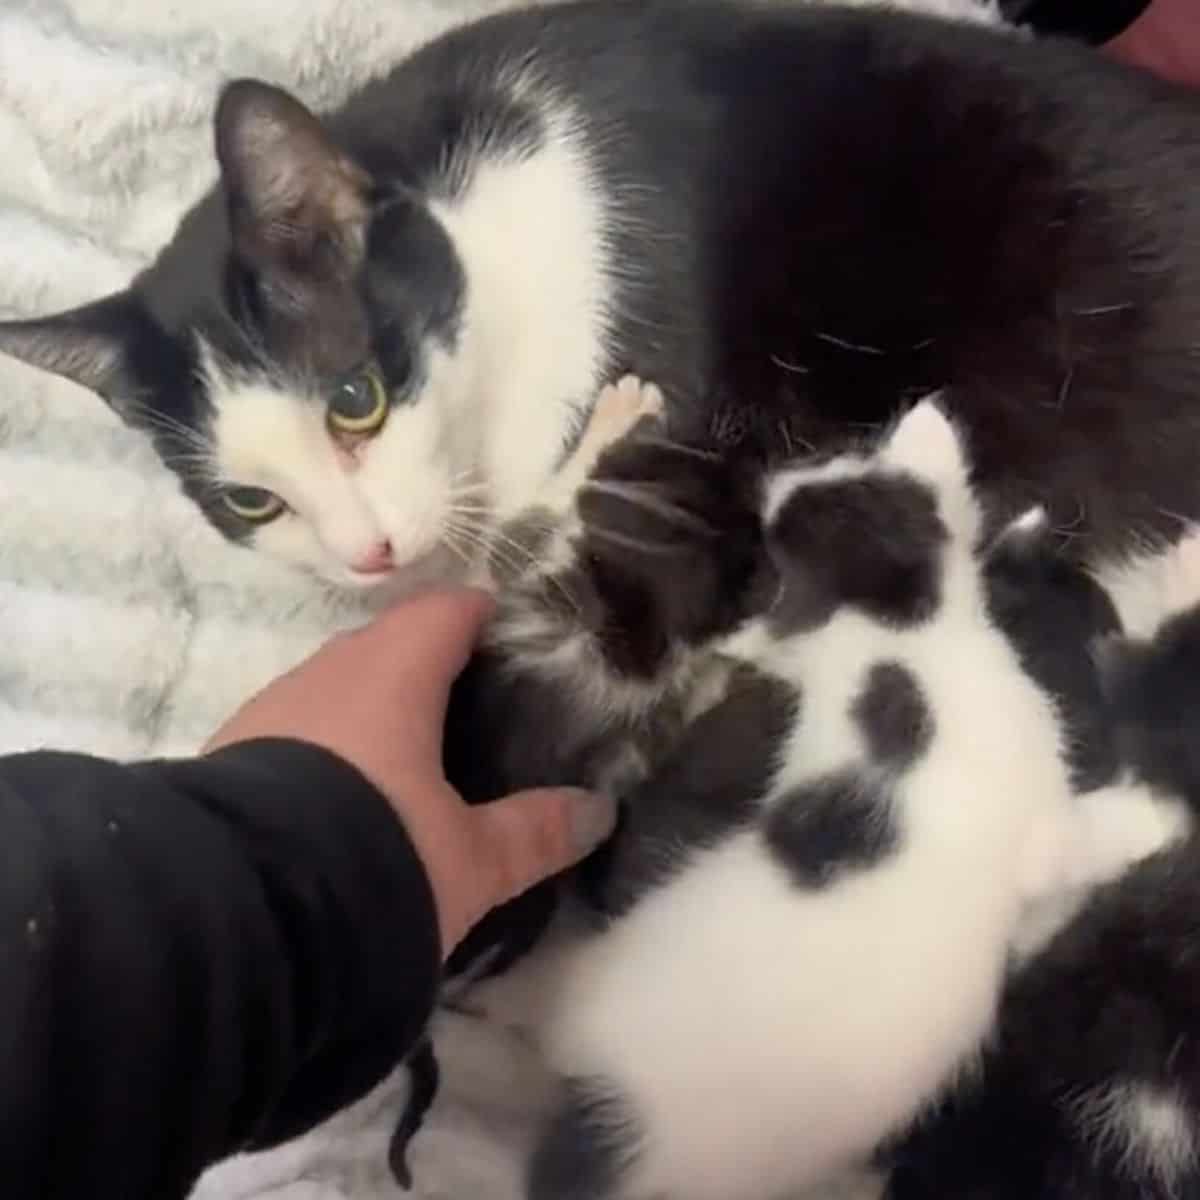 owner petting cat and her kittens